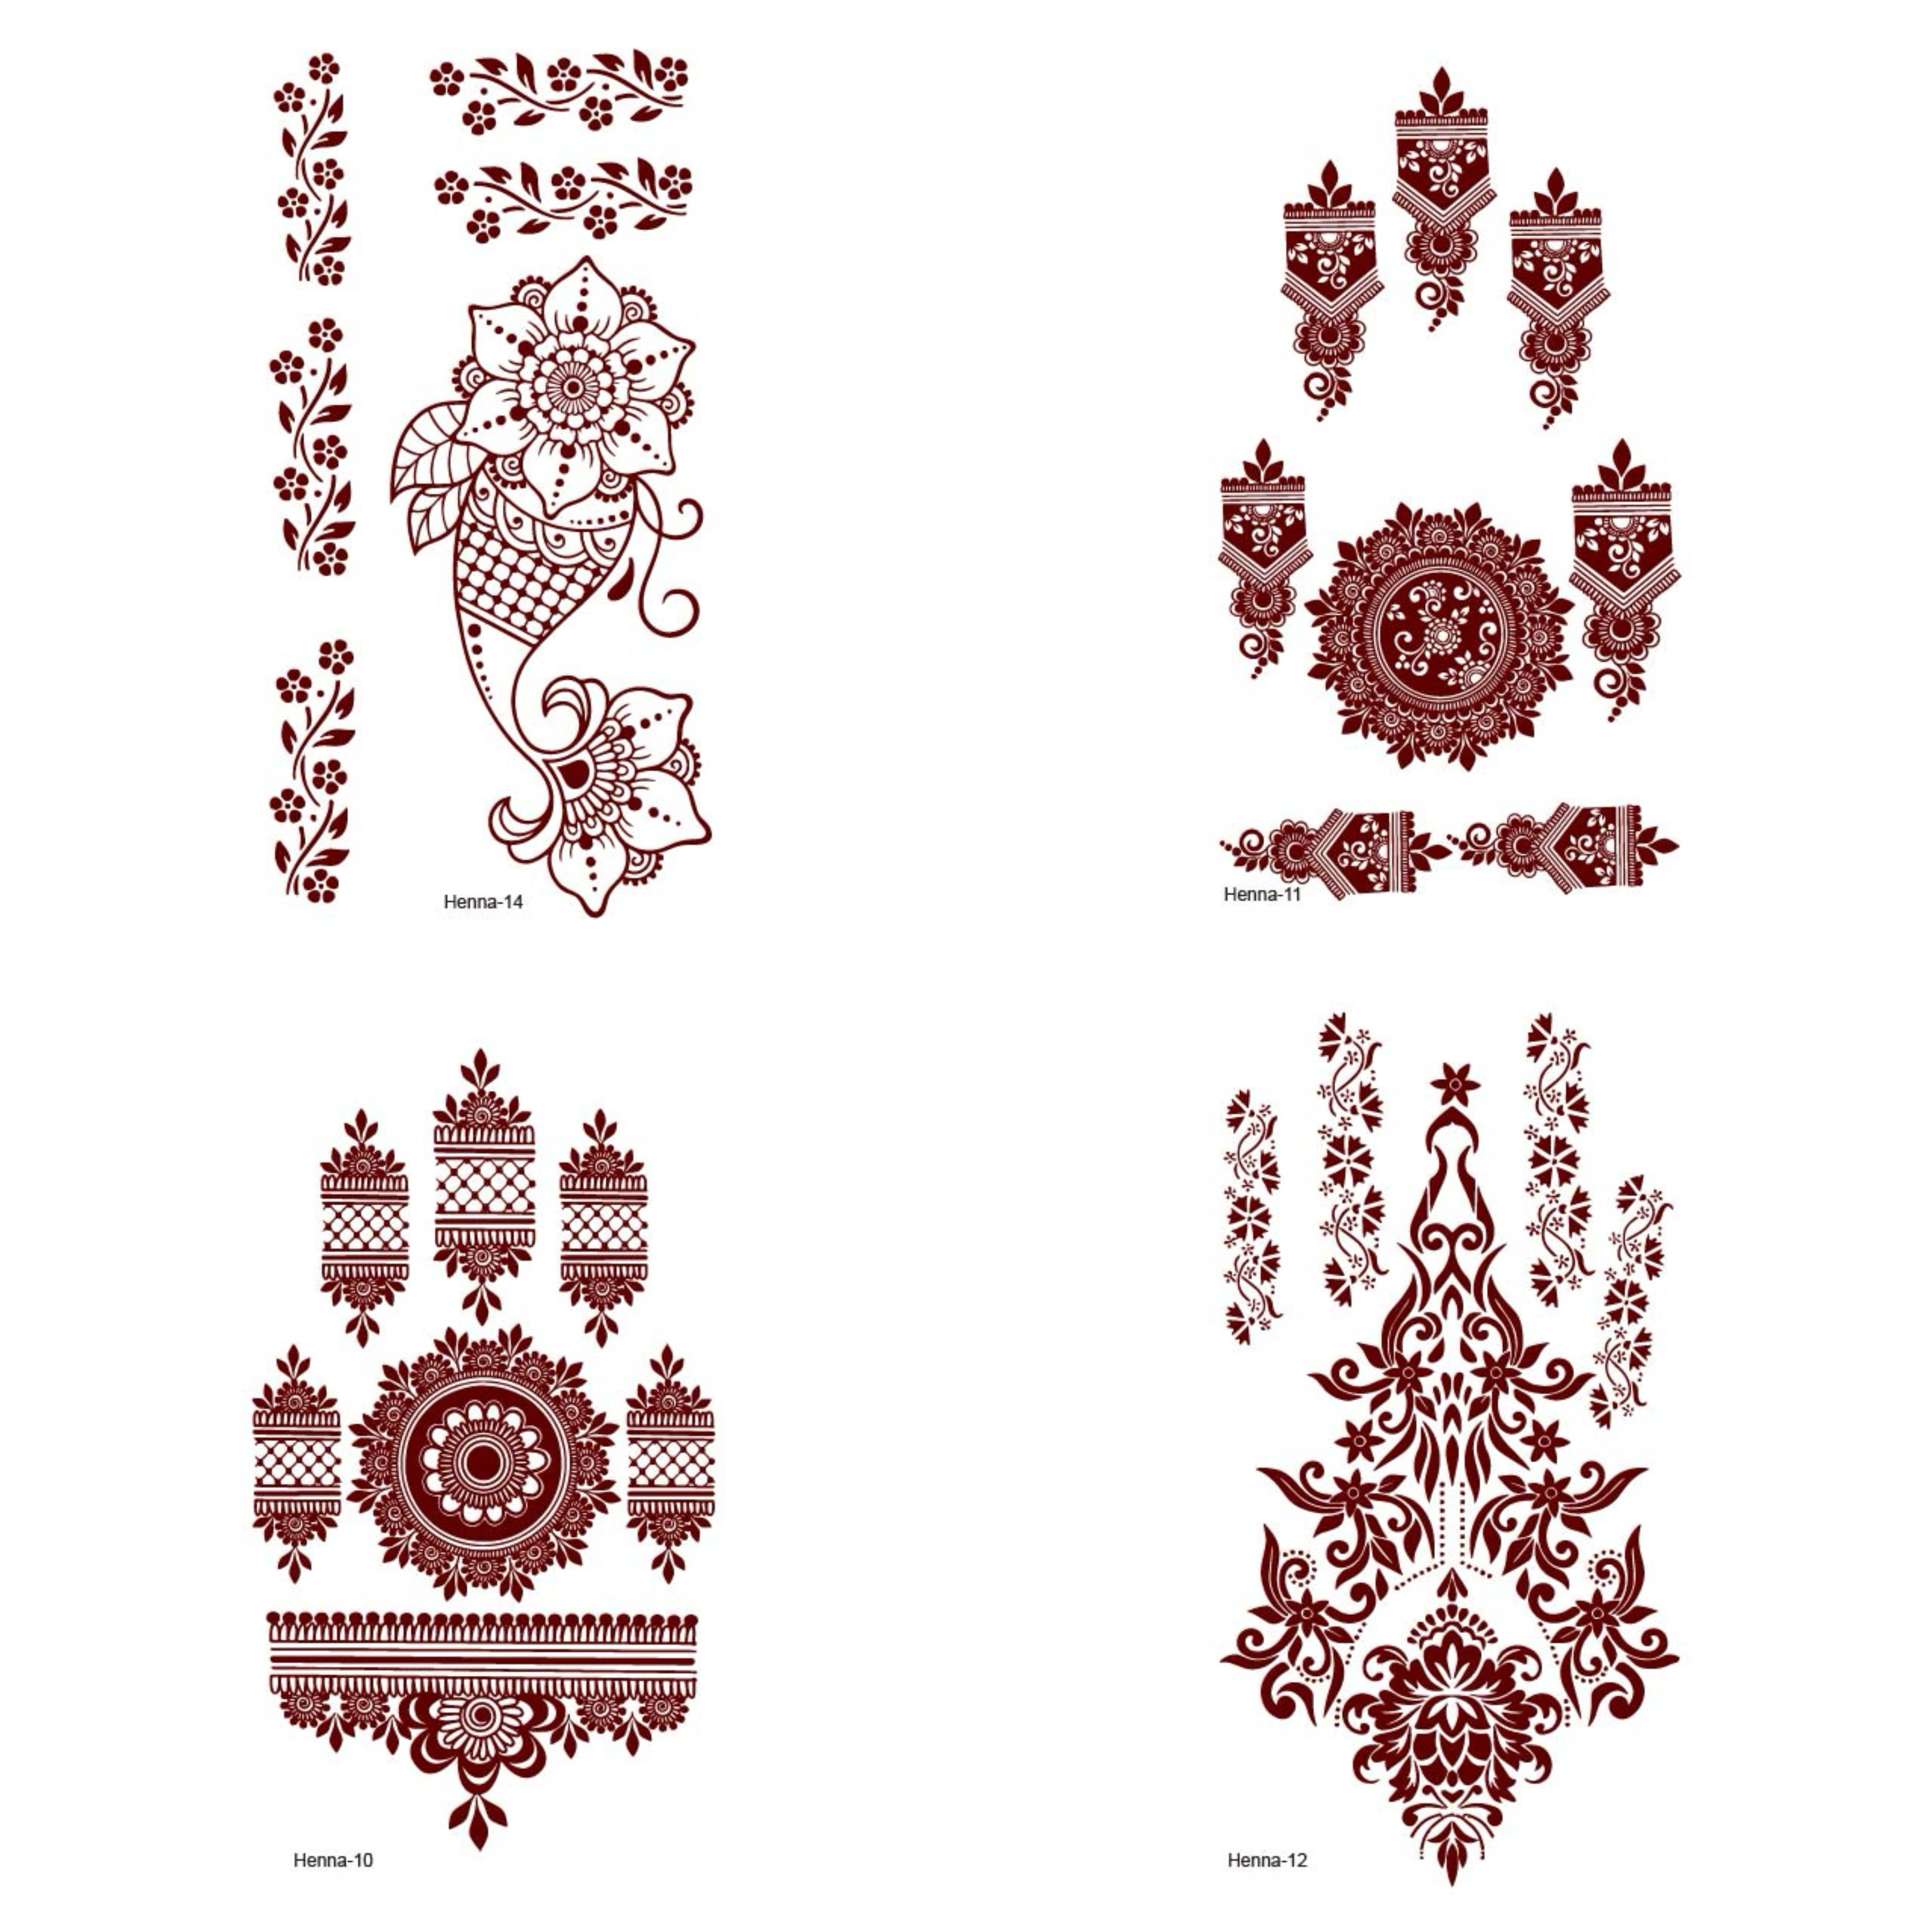 

4pcs Beautiful Temporary Tattoo Stickers With Mandala Floral Vine And Leaf Designs, Finger, Hand Back, And Hand Decorations, Waterproof And Sweatproof